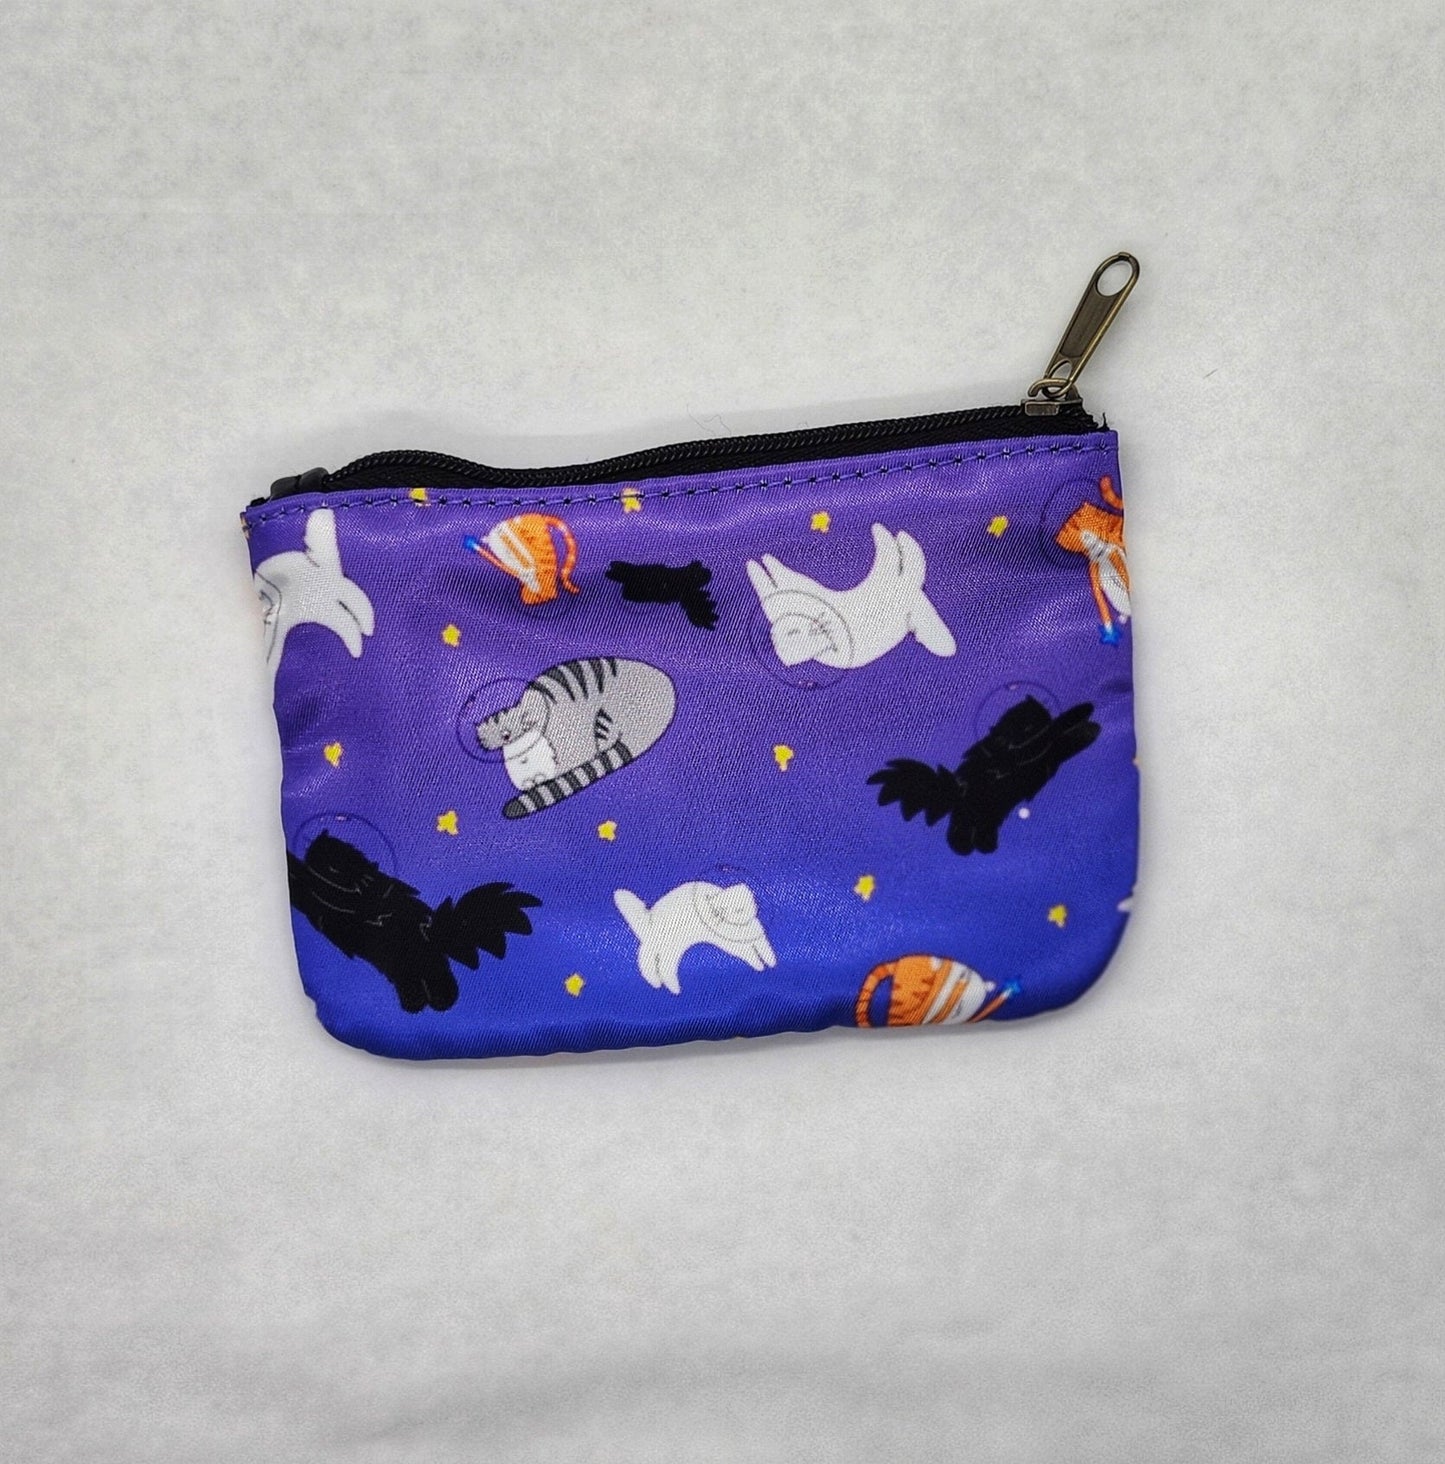 Space Cats Coin Purse, Astronaut Cats Coin Purse, Cat Lover Bag, Cute Cat Gift, Space Cat Lover Bag, Space Cosmic Aesthetic Purse